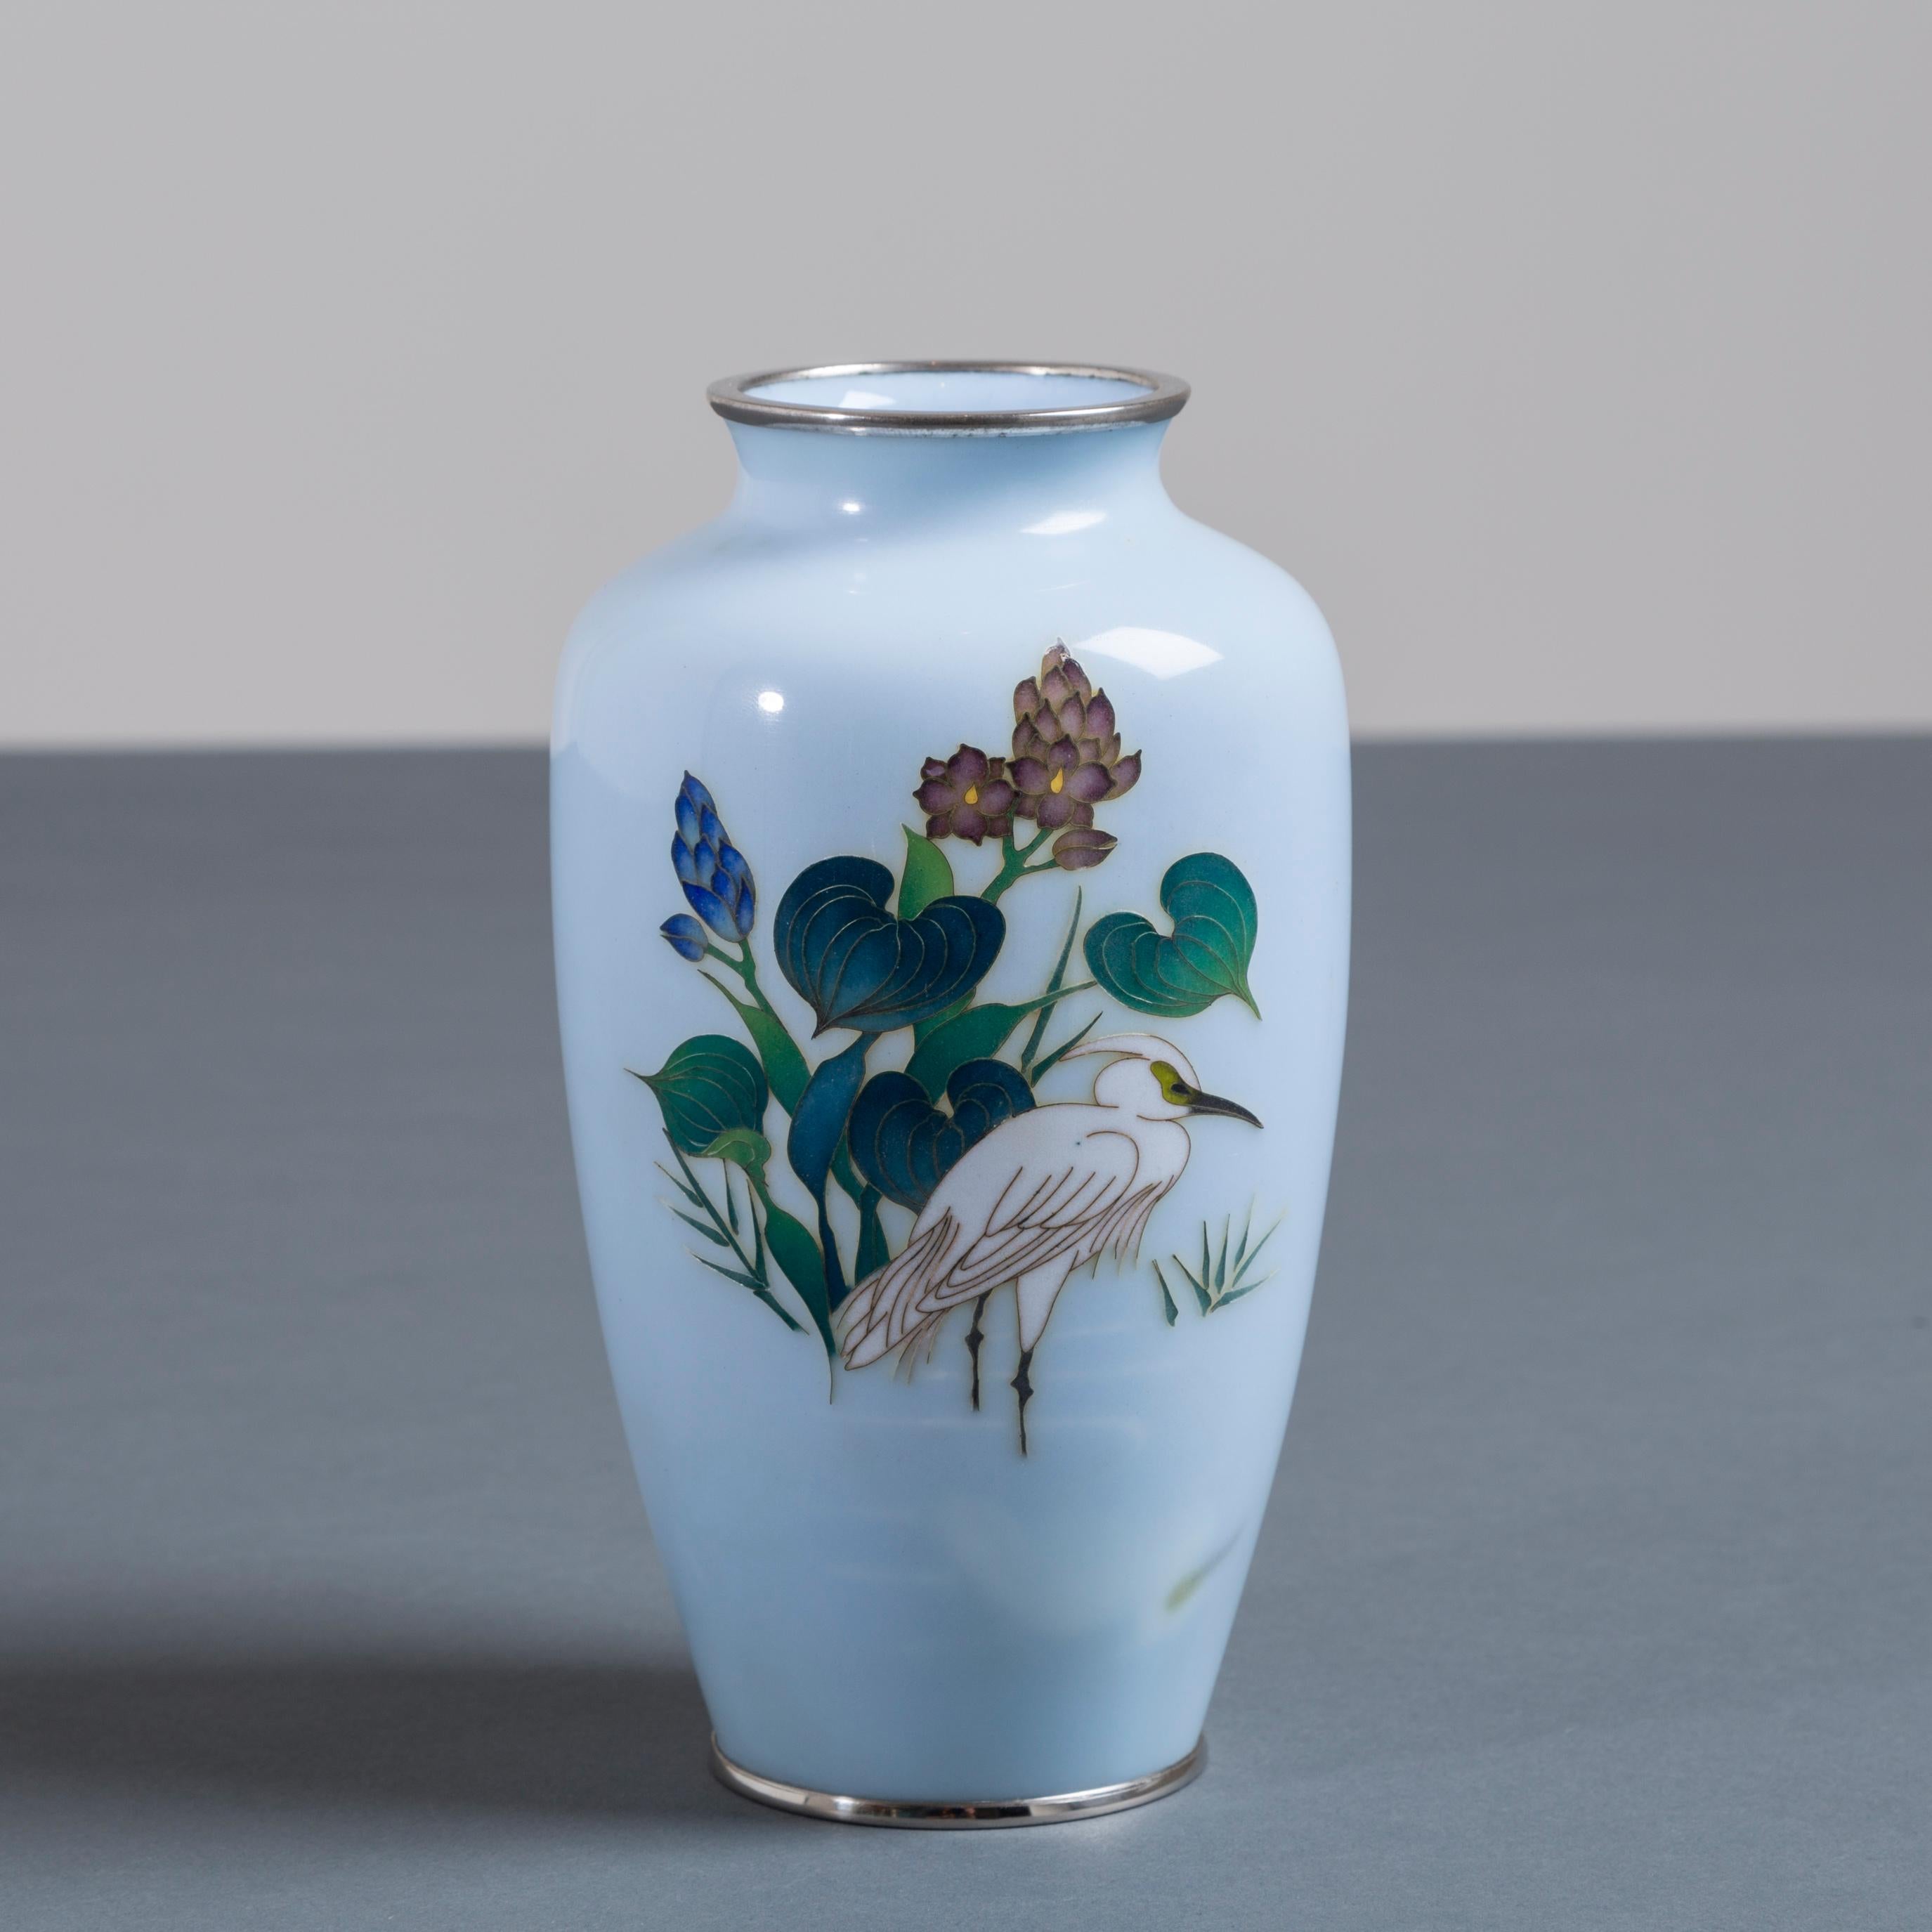 Mid-20th Century Japanese Cloisonné Enamel Vase Late Showa Period For Sale